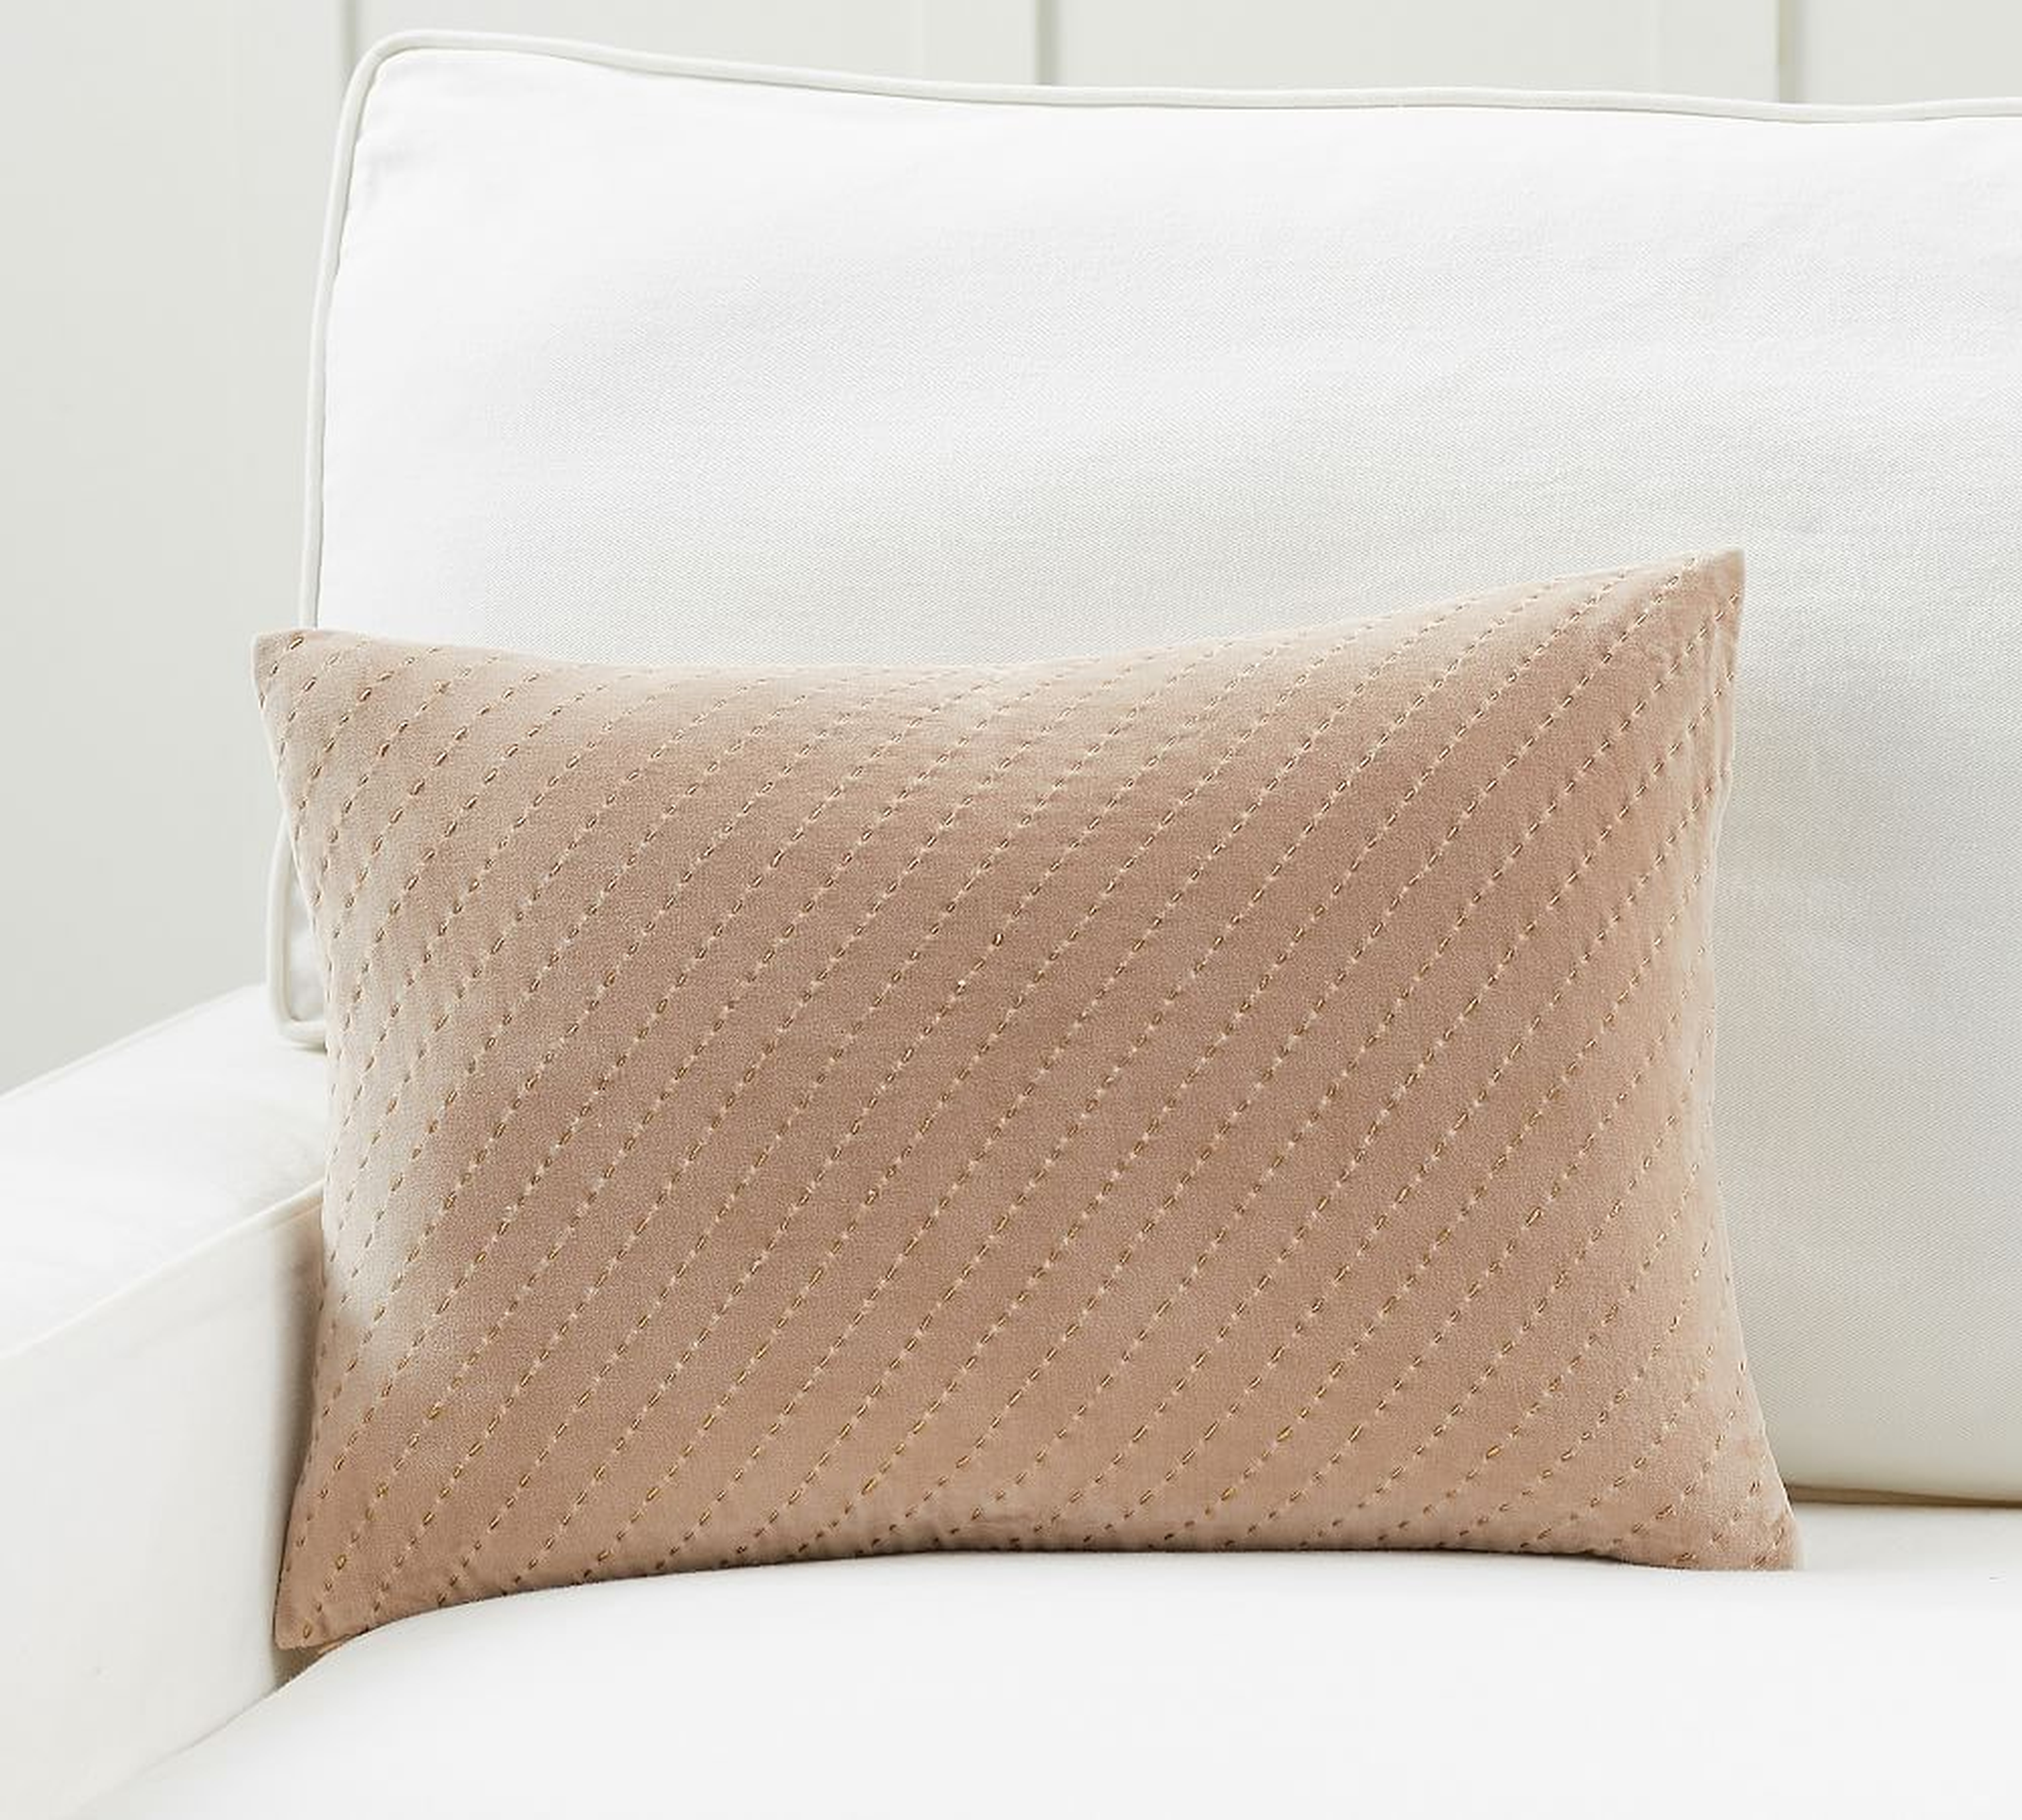 Ceres Velvet Pickstitch Lumbar Pillow Cover, 14 x 20", Taupe - Pottery Barn